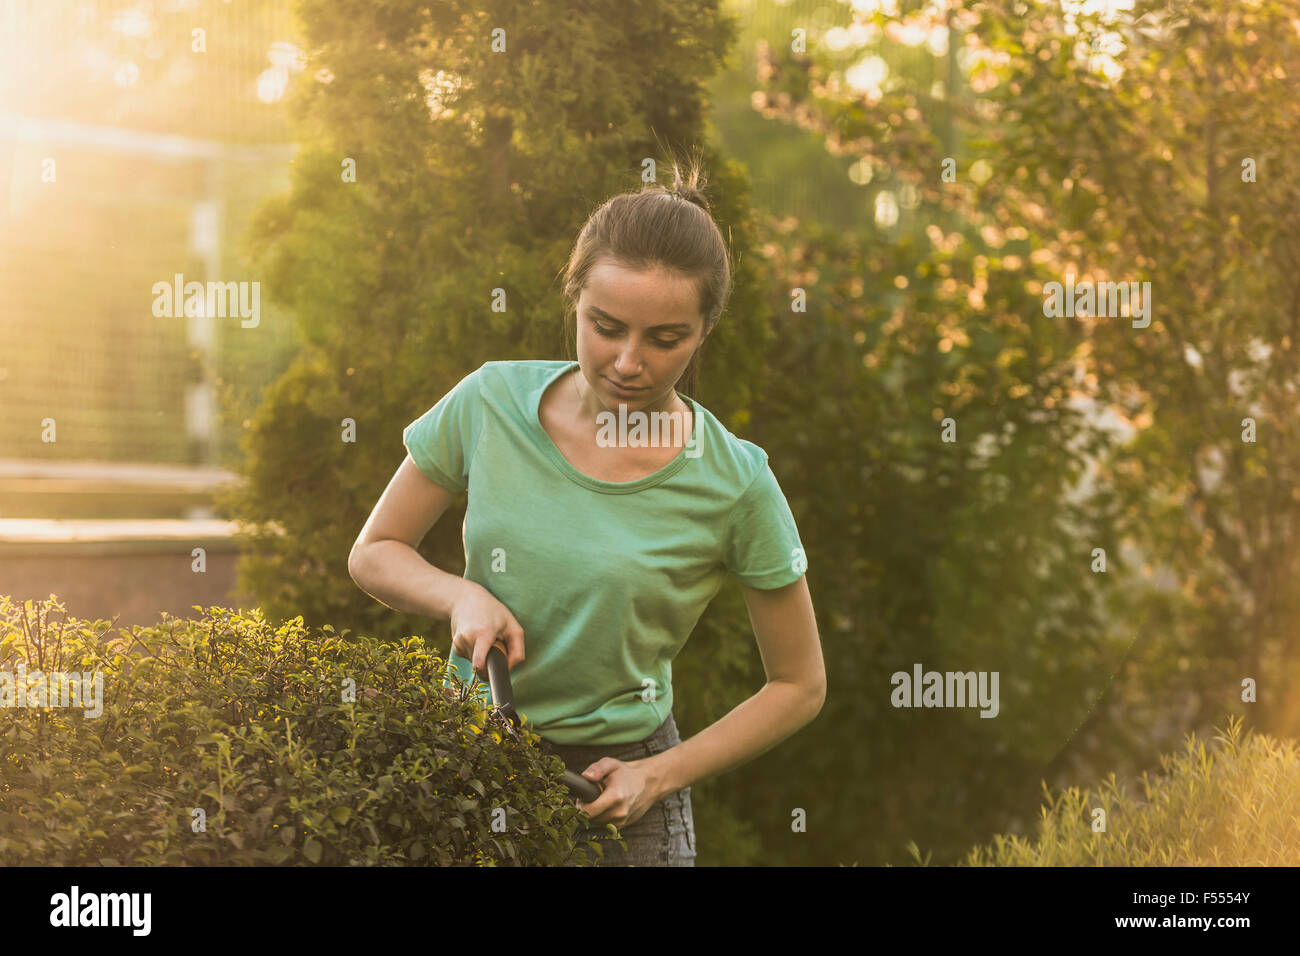 Woman cutting plants with pruning shears at yard Stock Photo